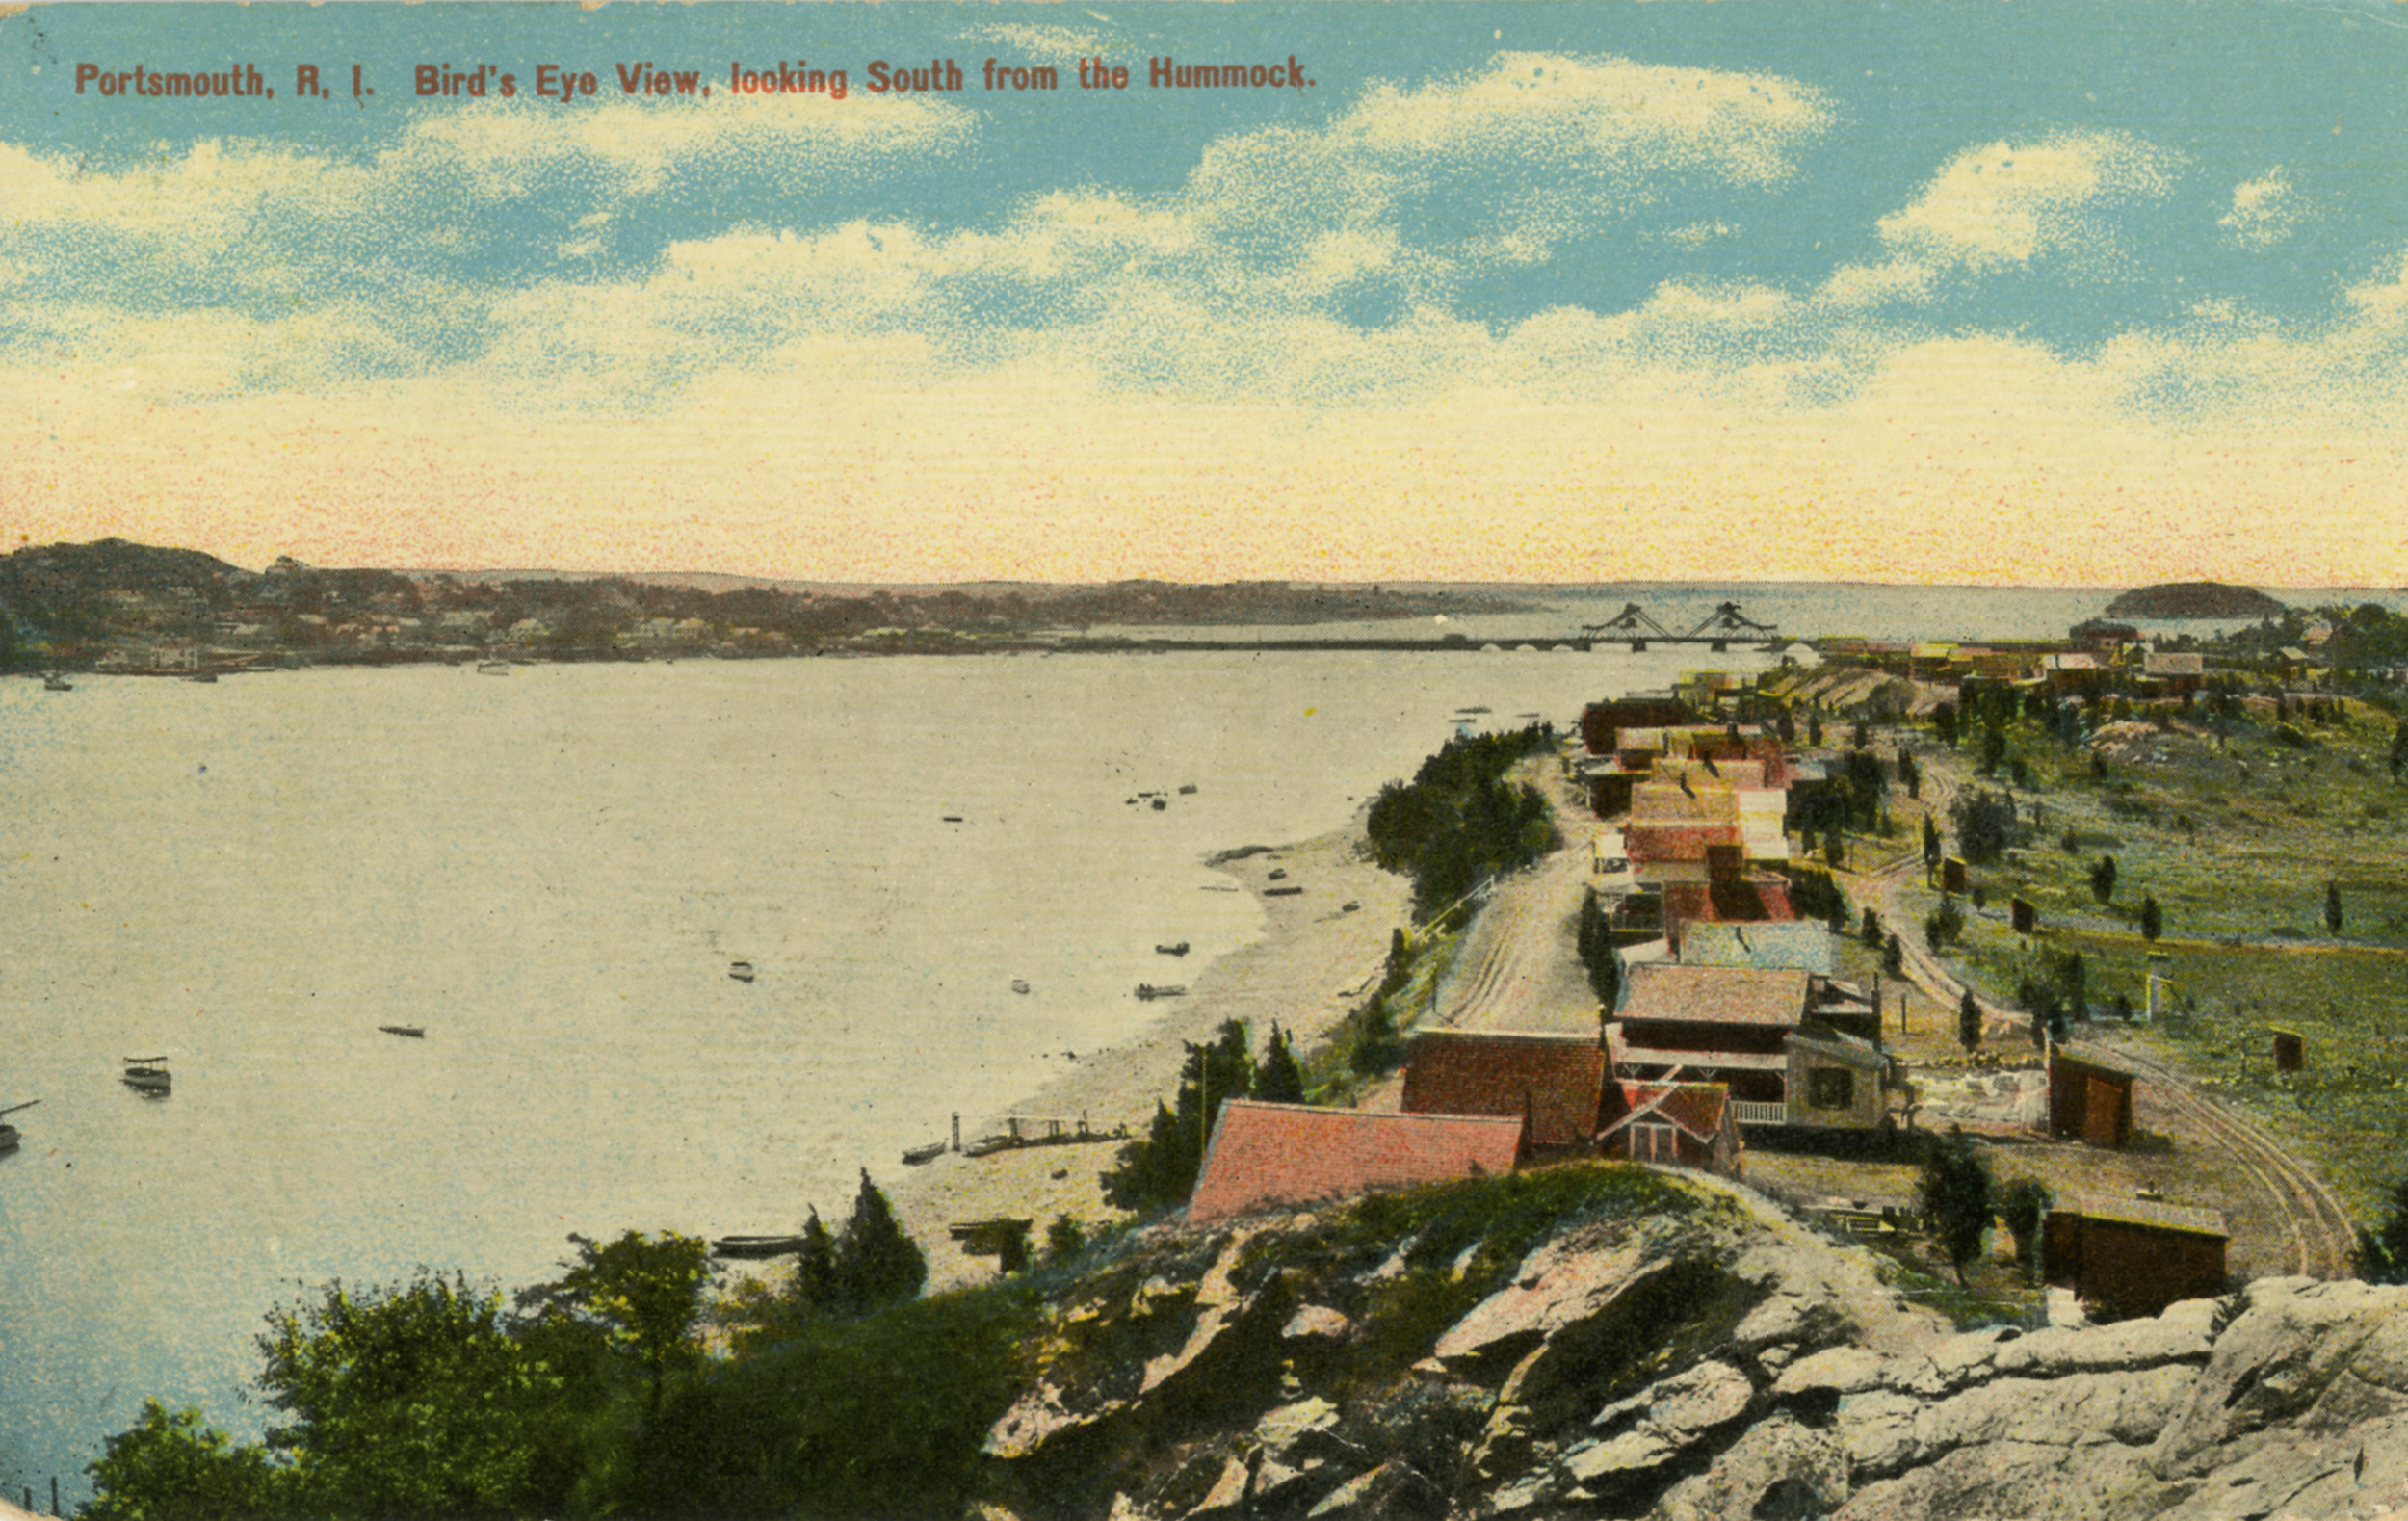 This colorized postcard from Jim Garman’s collection, dated from about 1914, shows the Hummocks with the Stone Bridge and Gould Island further to the south.